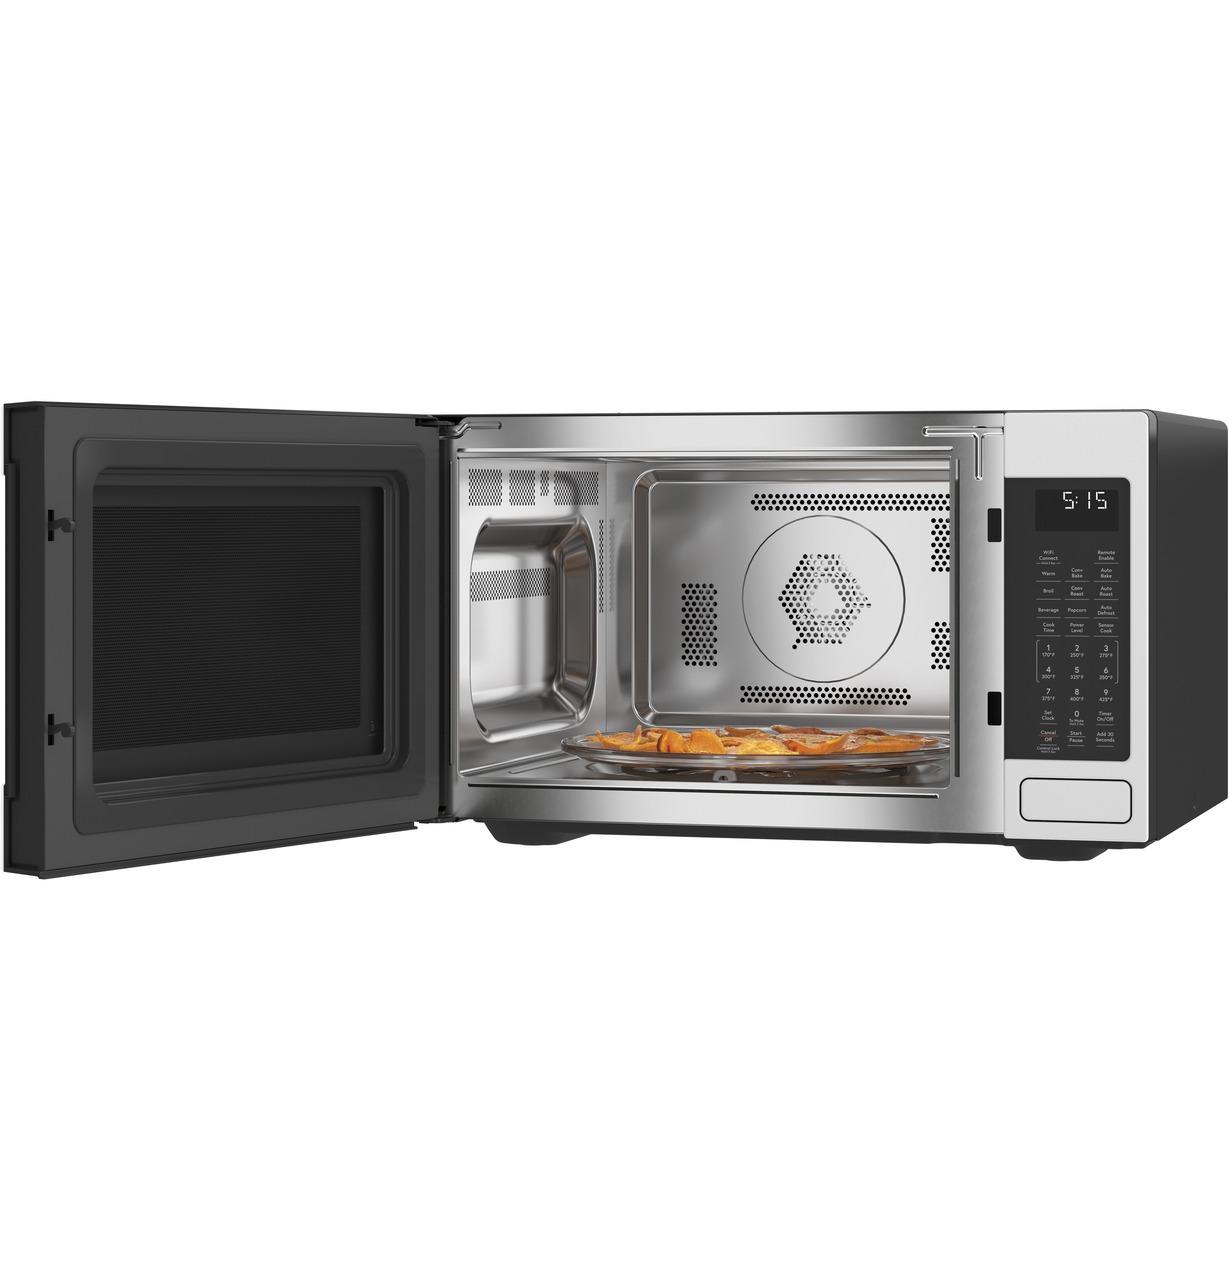 Cafe Caf(eback)™ 1.5 Cu. Ft. Smart Countertop Convection/Microwave Oven